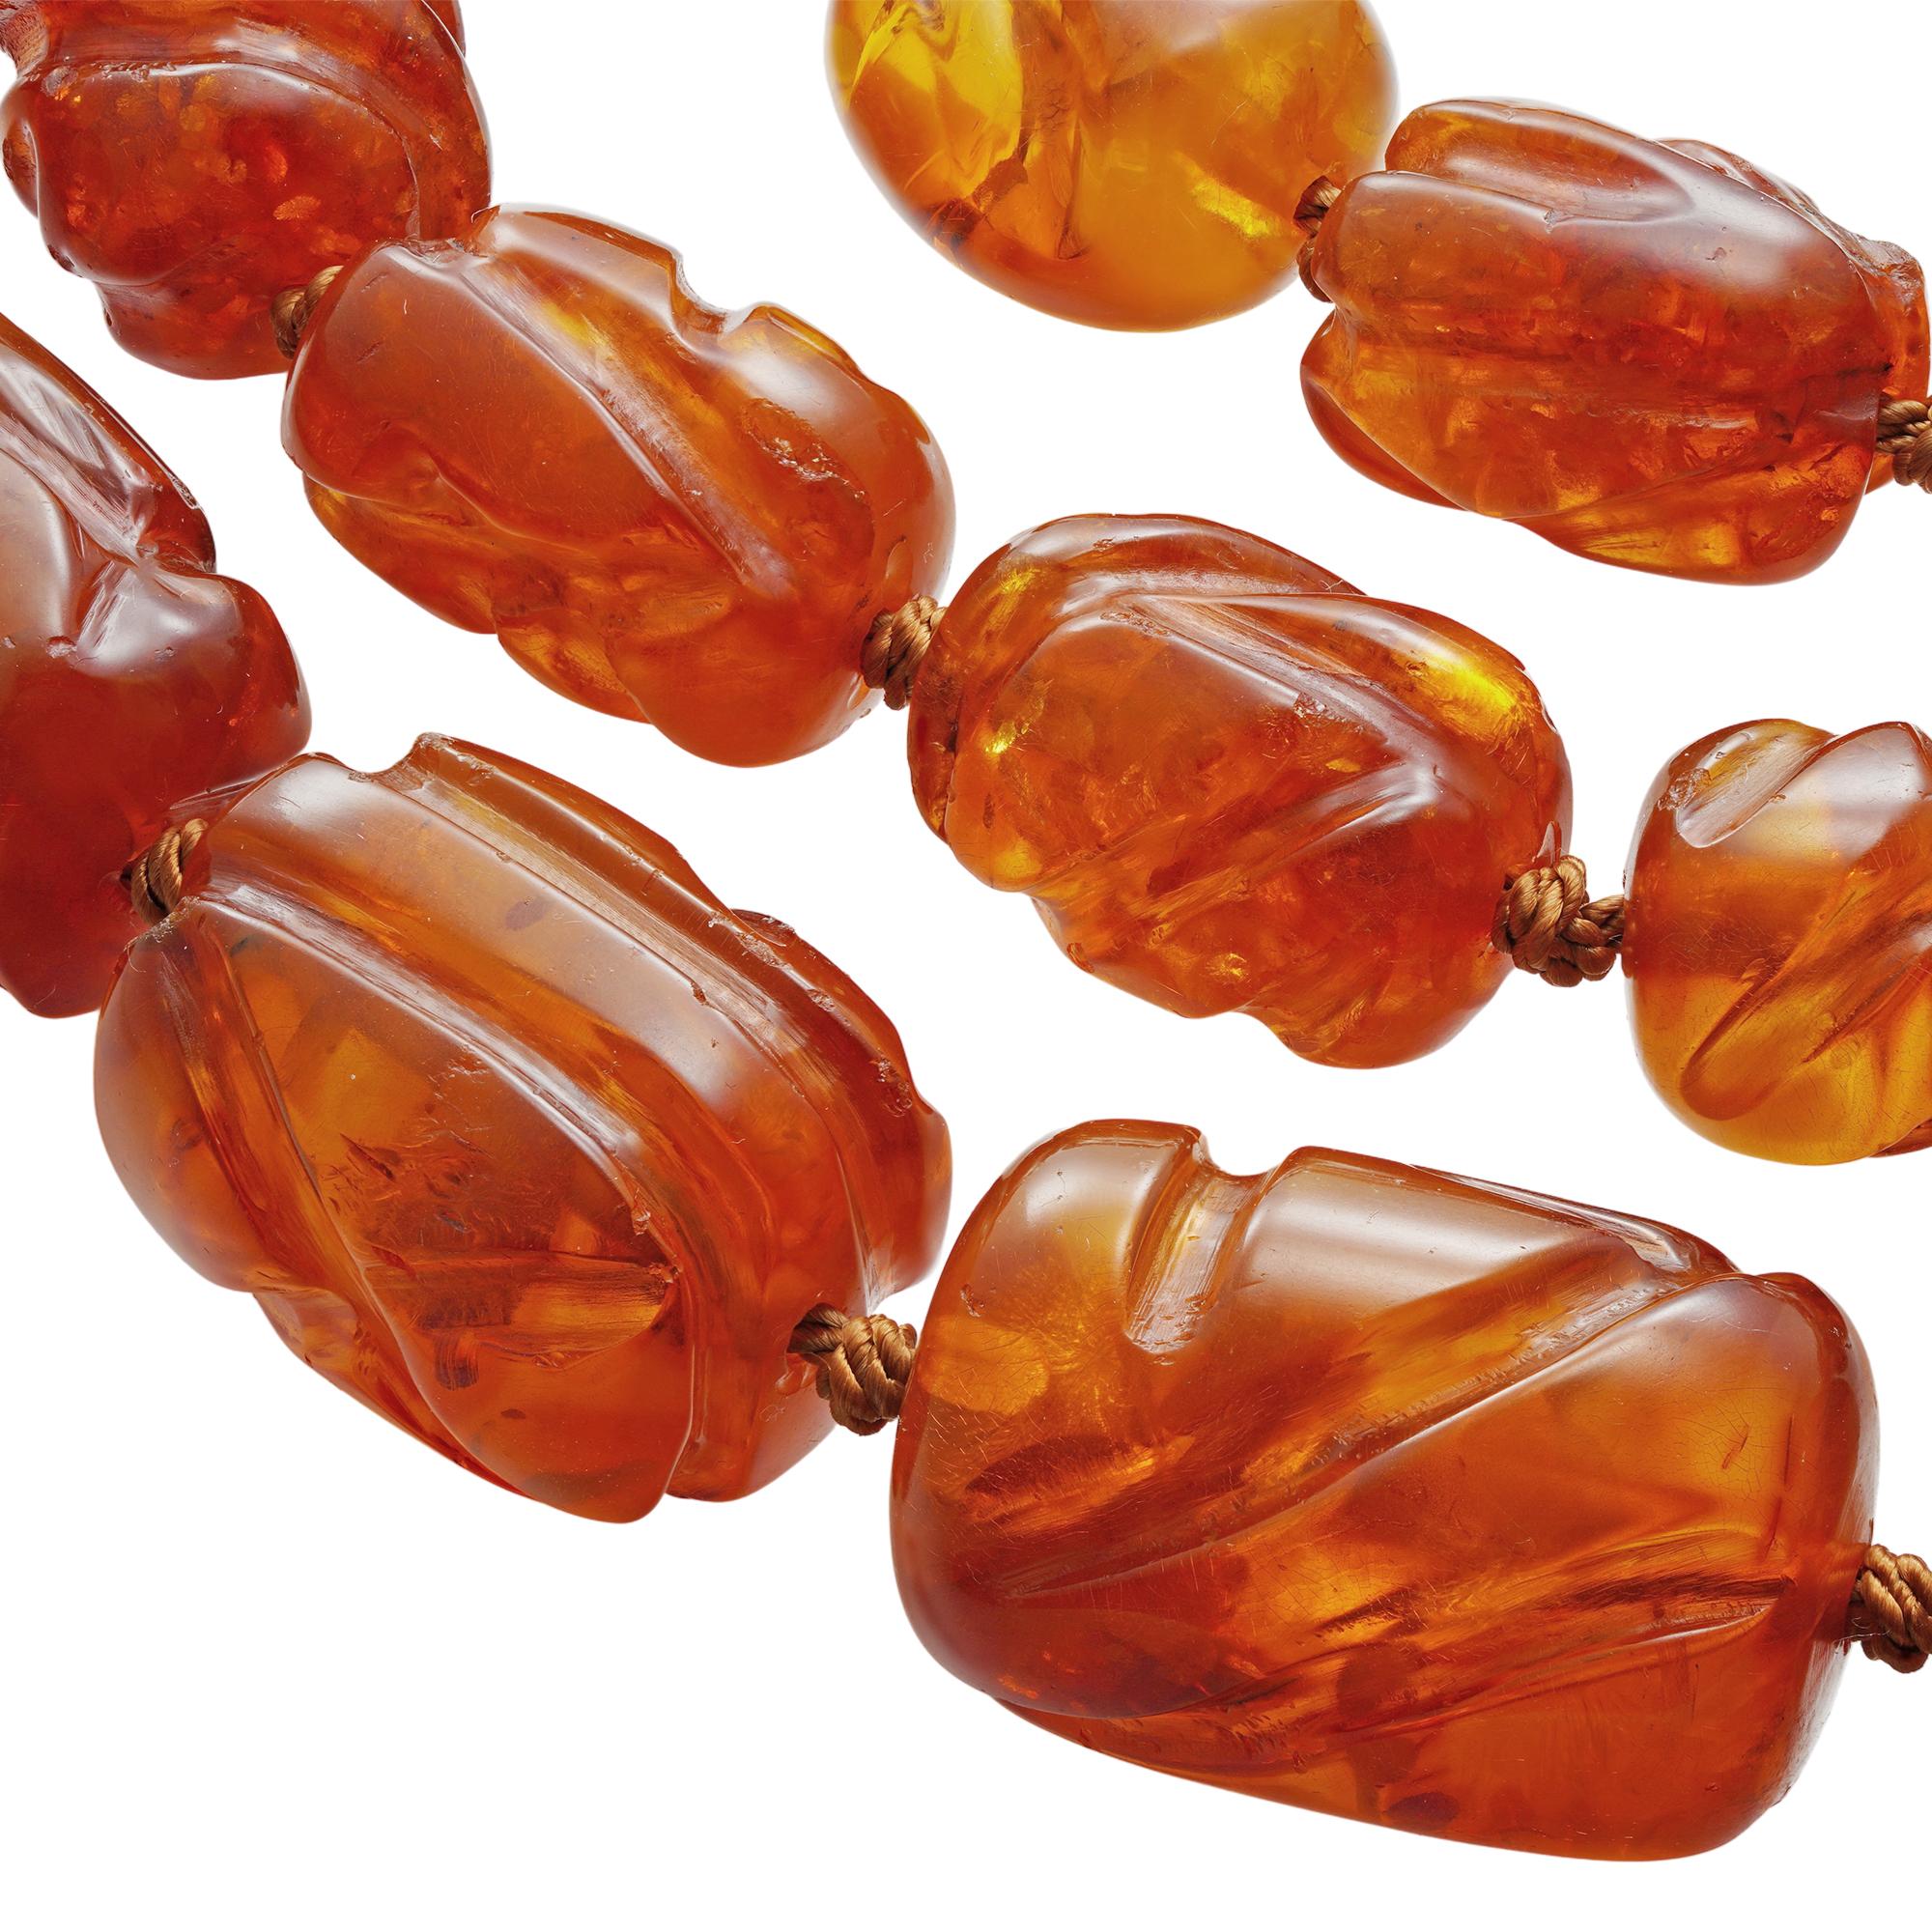 A Grand amber necklace, the 34 graduated carved amber beads with distinctive spangle inclusions, length 50cm, gross weight 263.8 grams

This striking amber necklace comes from the collection of Bentley & Skinner, the London jewellers by appointment